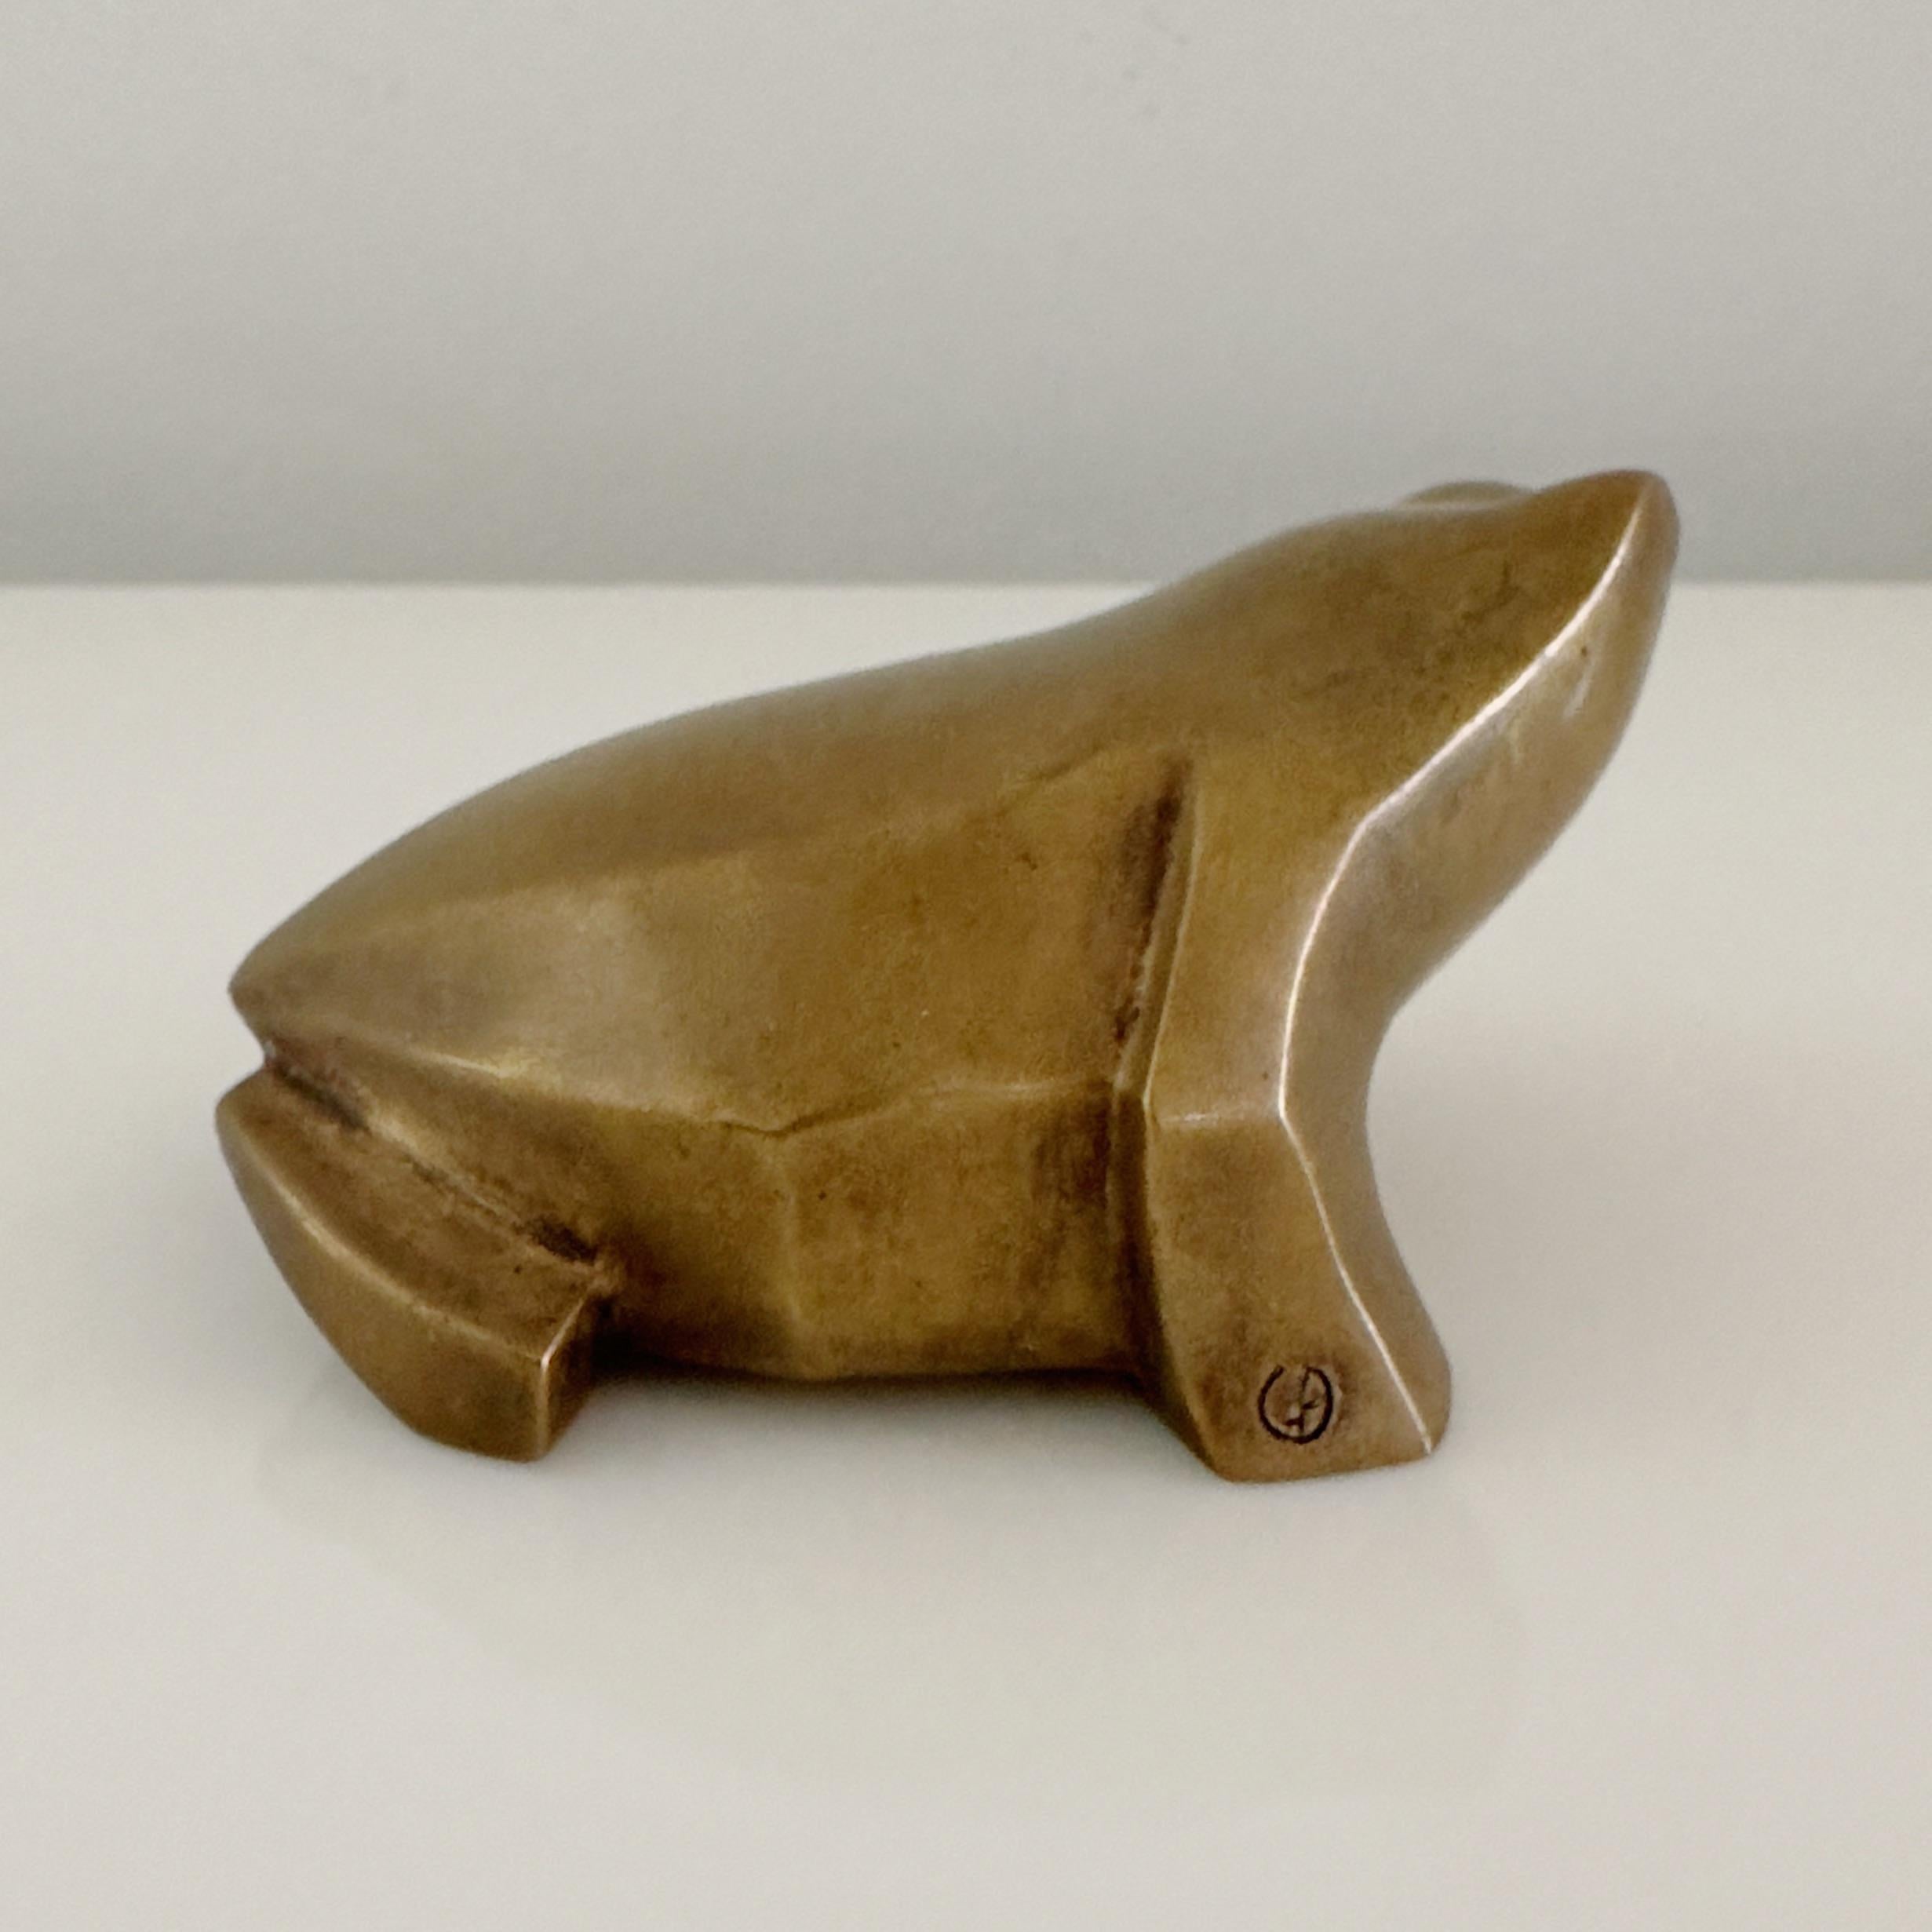 This bronze sculpture of a stylized frog is typical of Boudon's works. He expresses himself with a strong, vibrant form, isolating the animal's characteristic features -- the eyes, feet, and mouth -- to express its spirit. The sculpture is signed